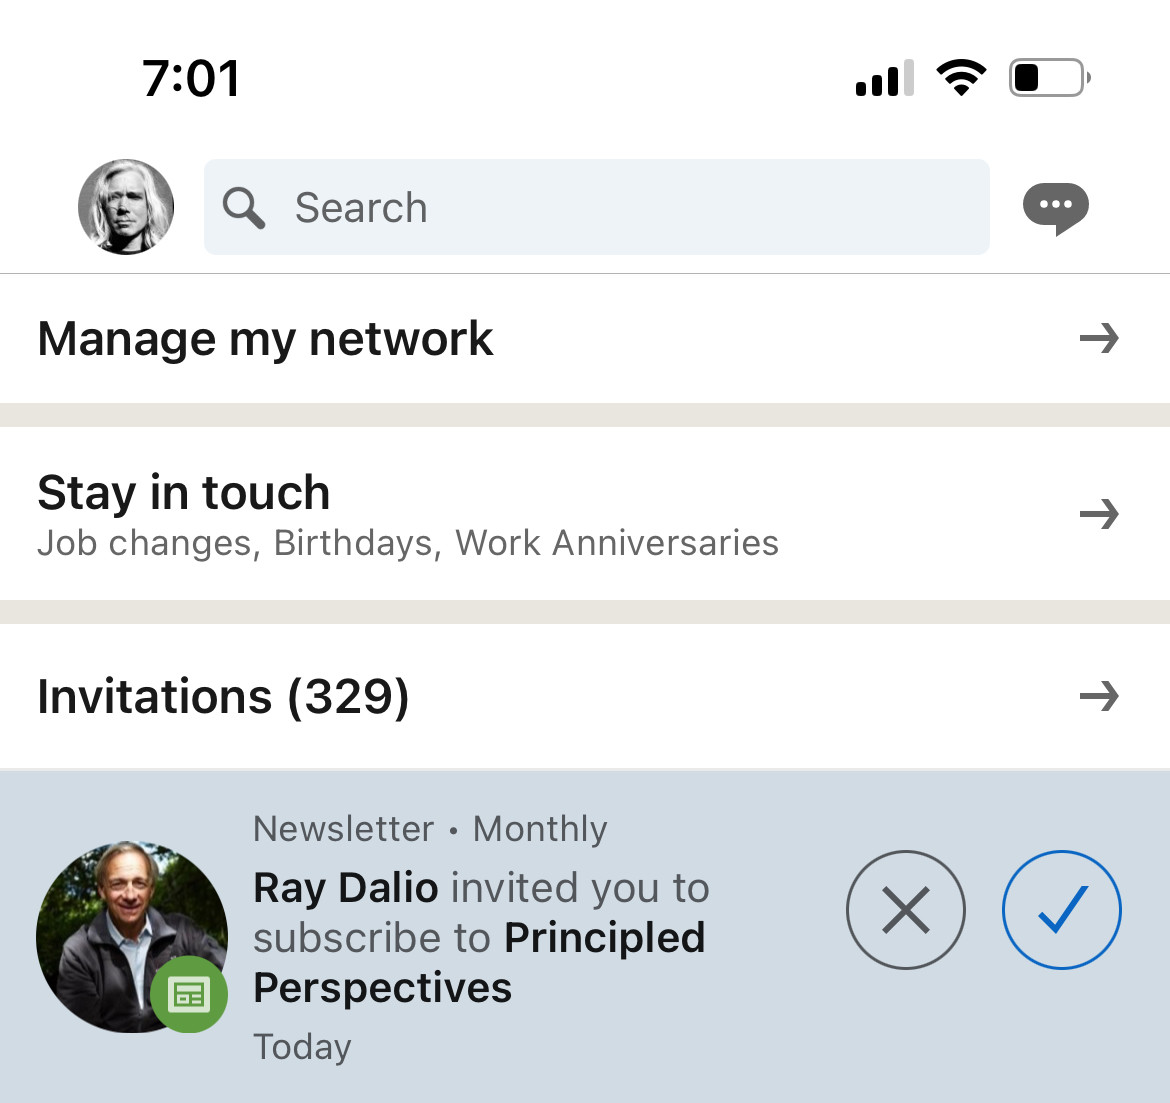 A cropped iOS screenshot showing the LinkedIn app and the top of the Toot author’s feed, at the top of which is (under the header "Invitations (329)") the following prompt:
"Newsletter • Monthly
Ray Dalio invited you to
subscribe to Principled
Perspectives"